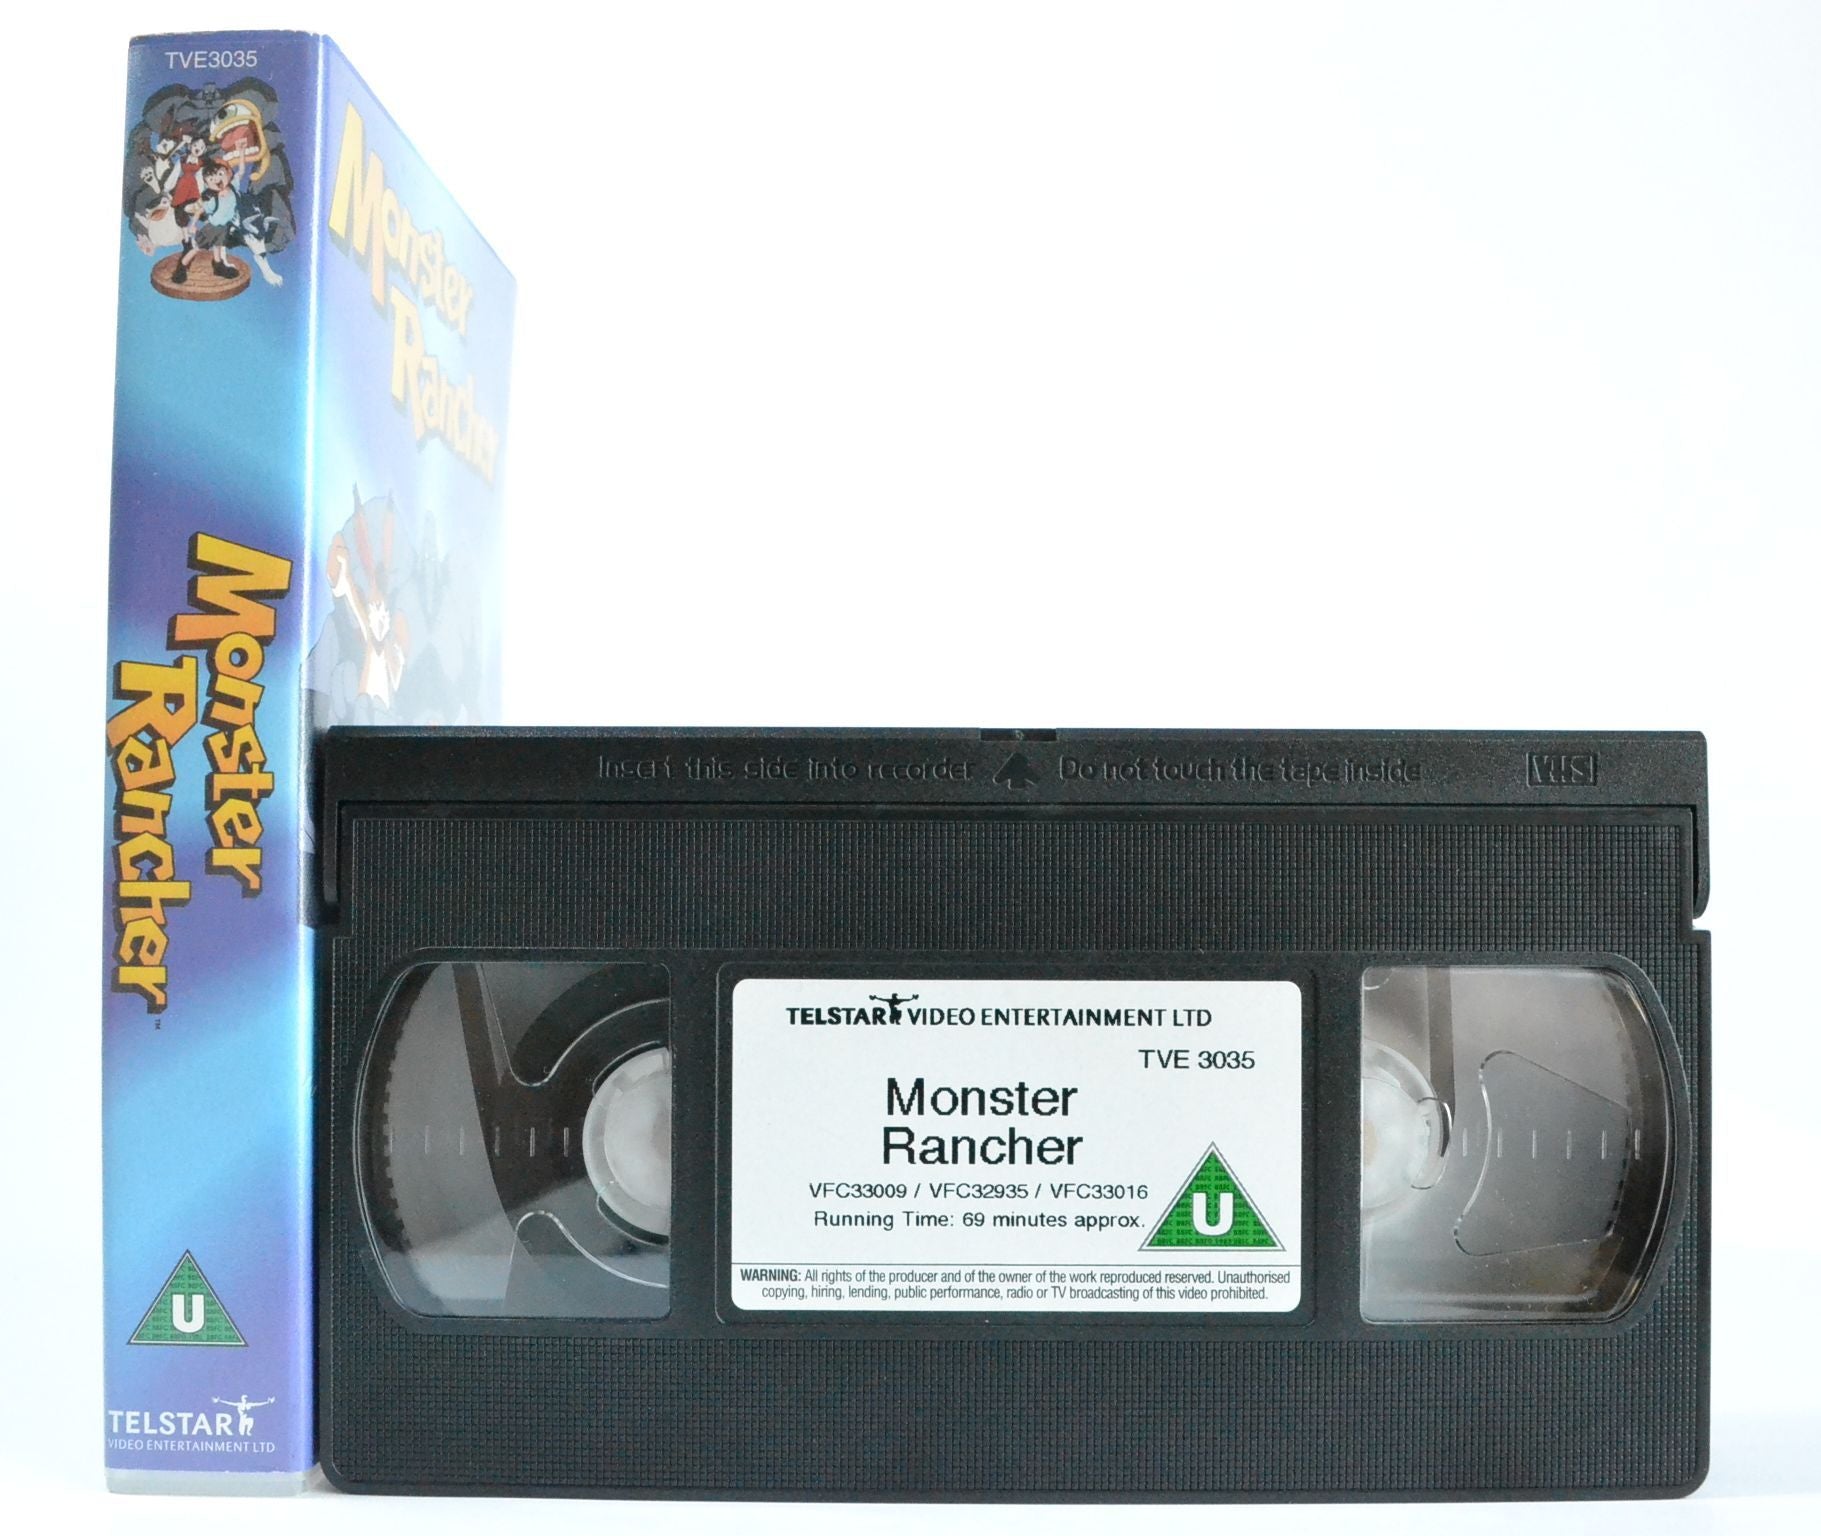 Monster Rancher: In The Beginning/I’m Mocchi/Guardian Of The Disks (1999) VHS-